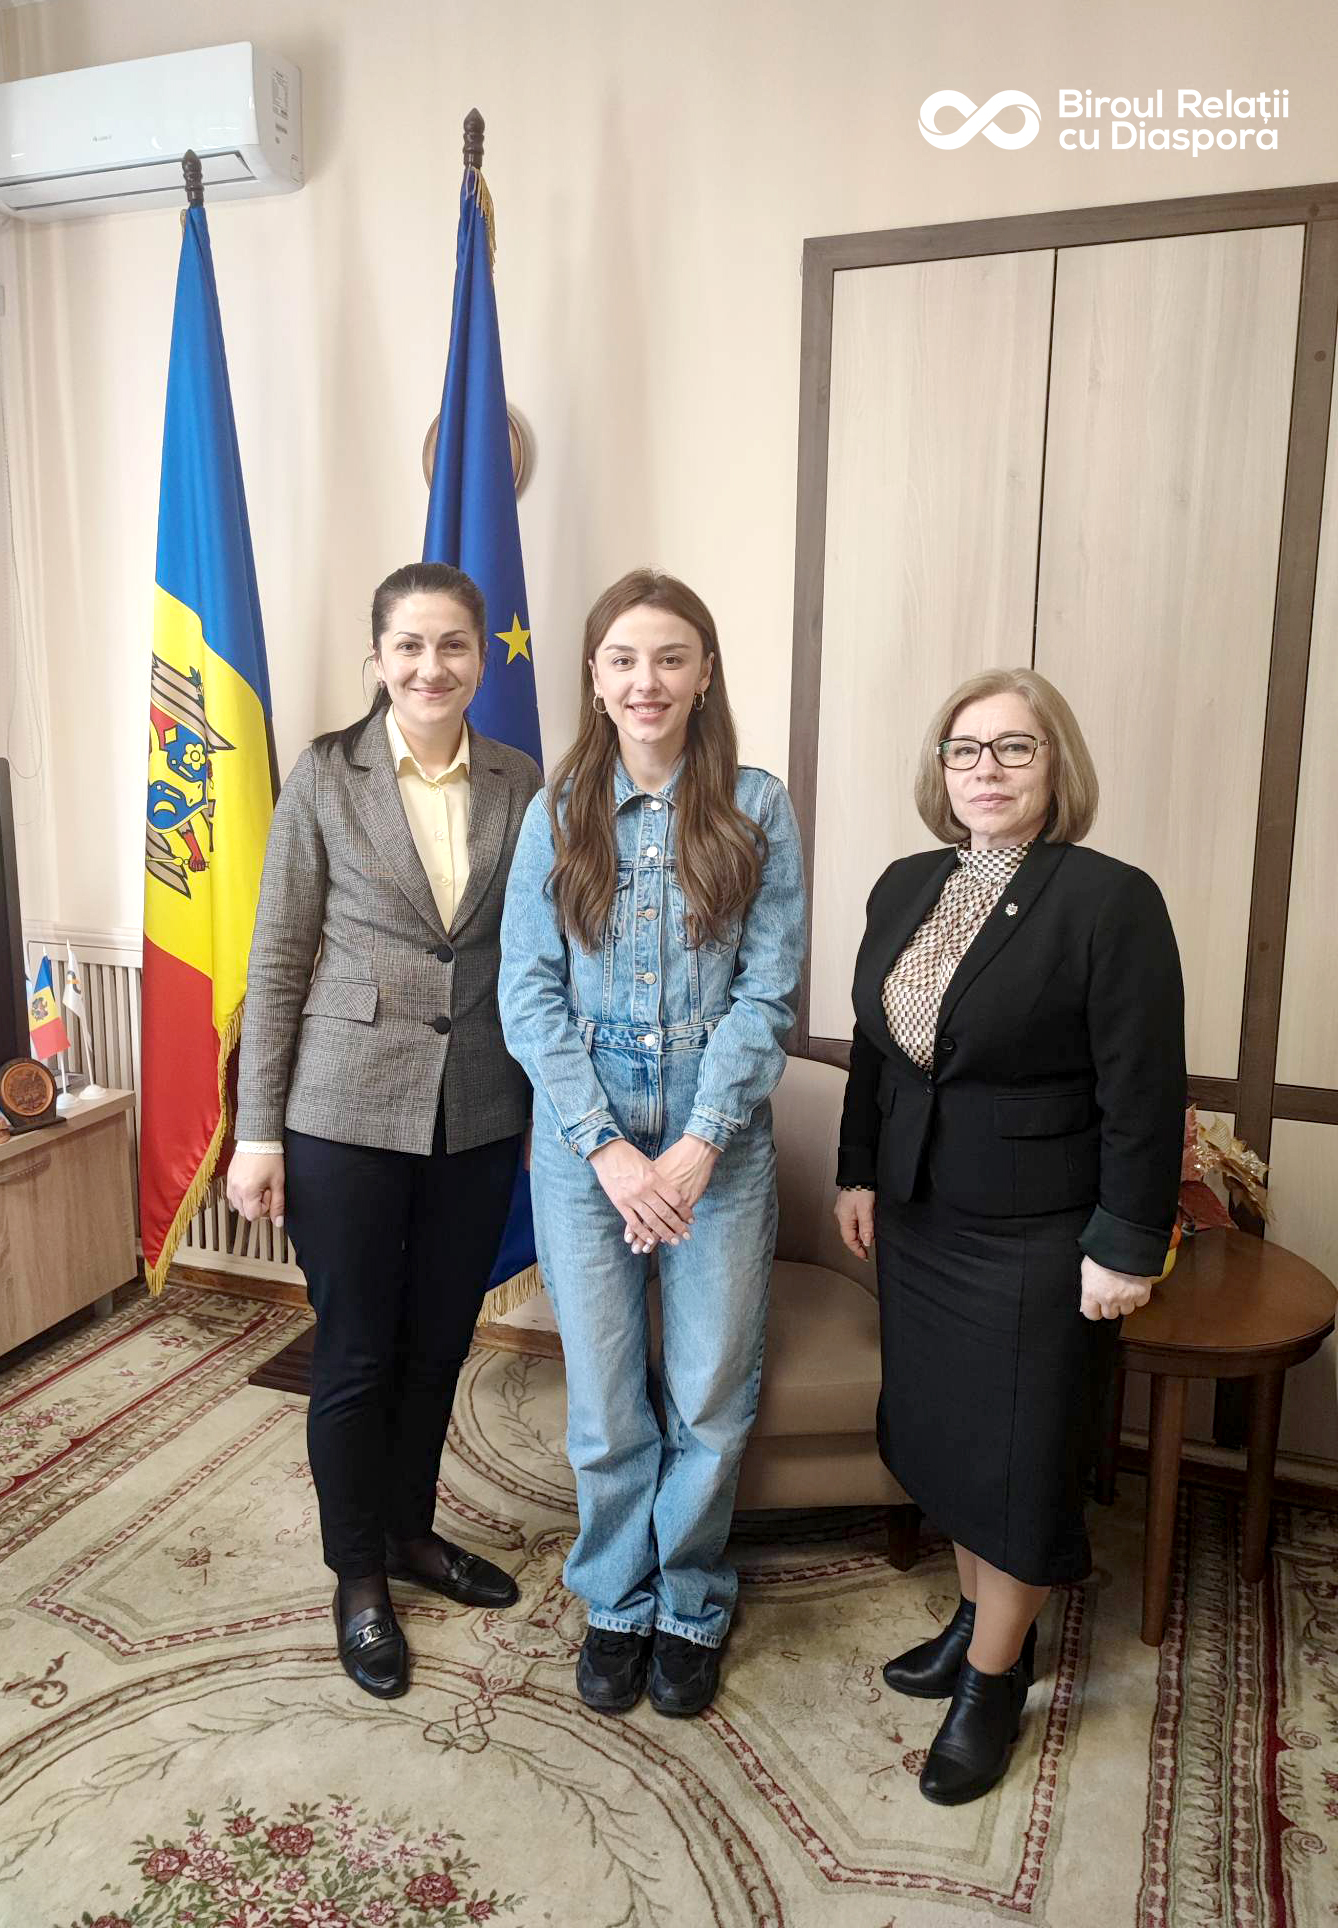 Gabriela Cojocaru, the talented young woman who is conquering China, visited the Diaspora Relations Bureau